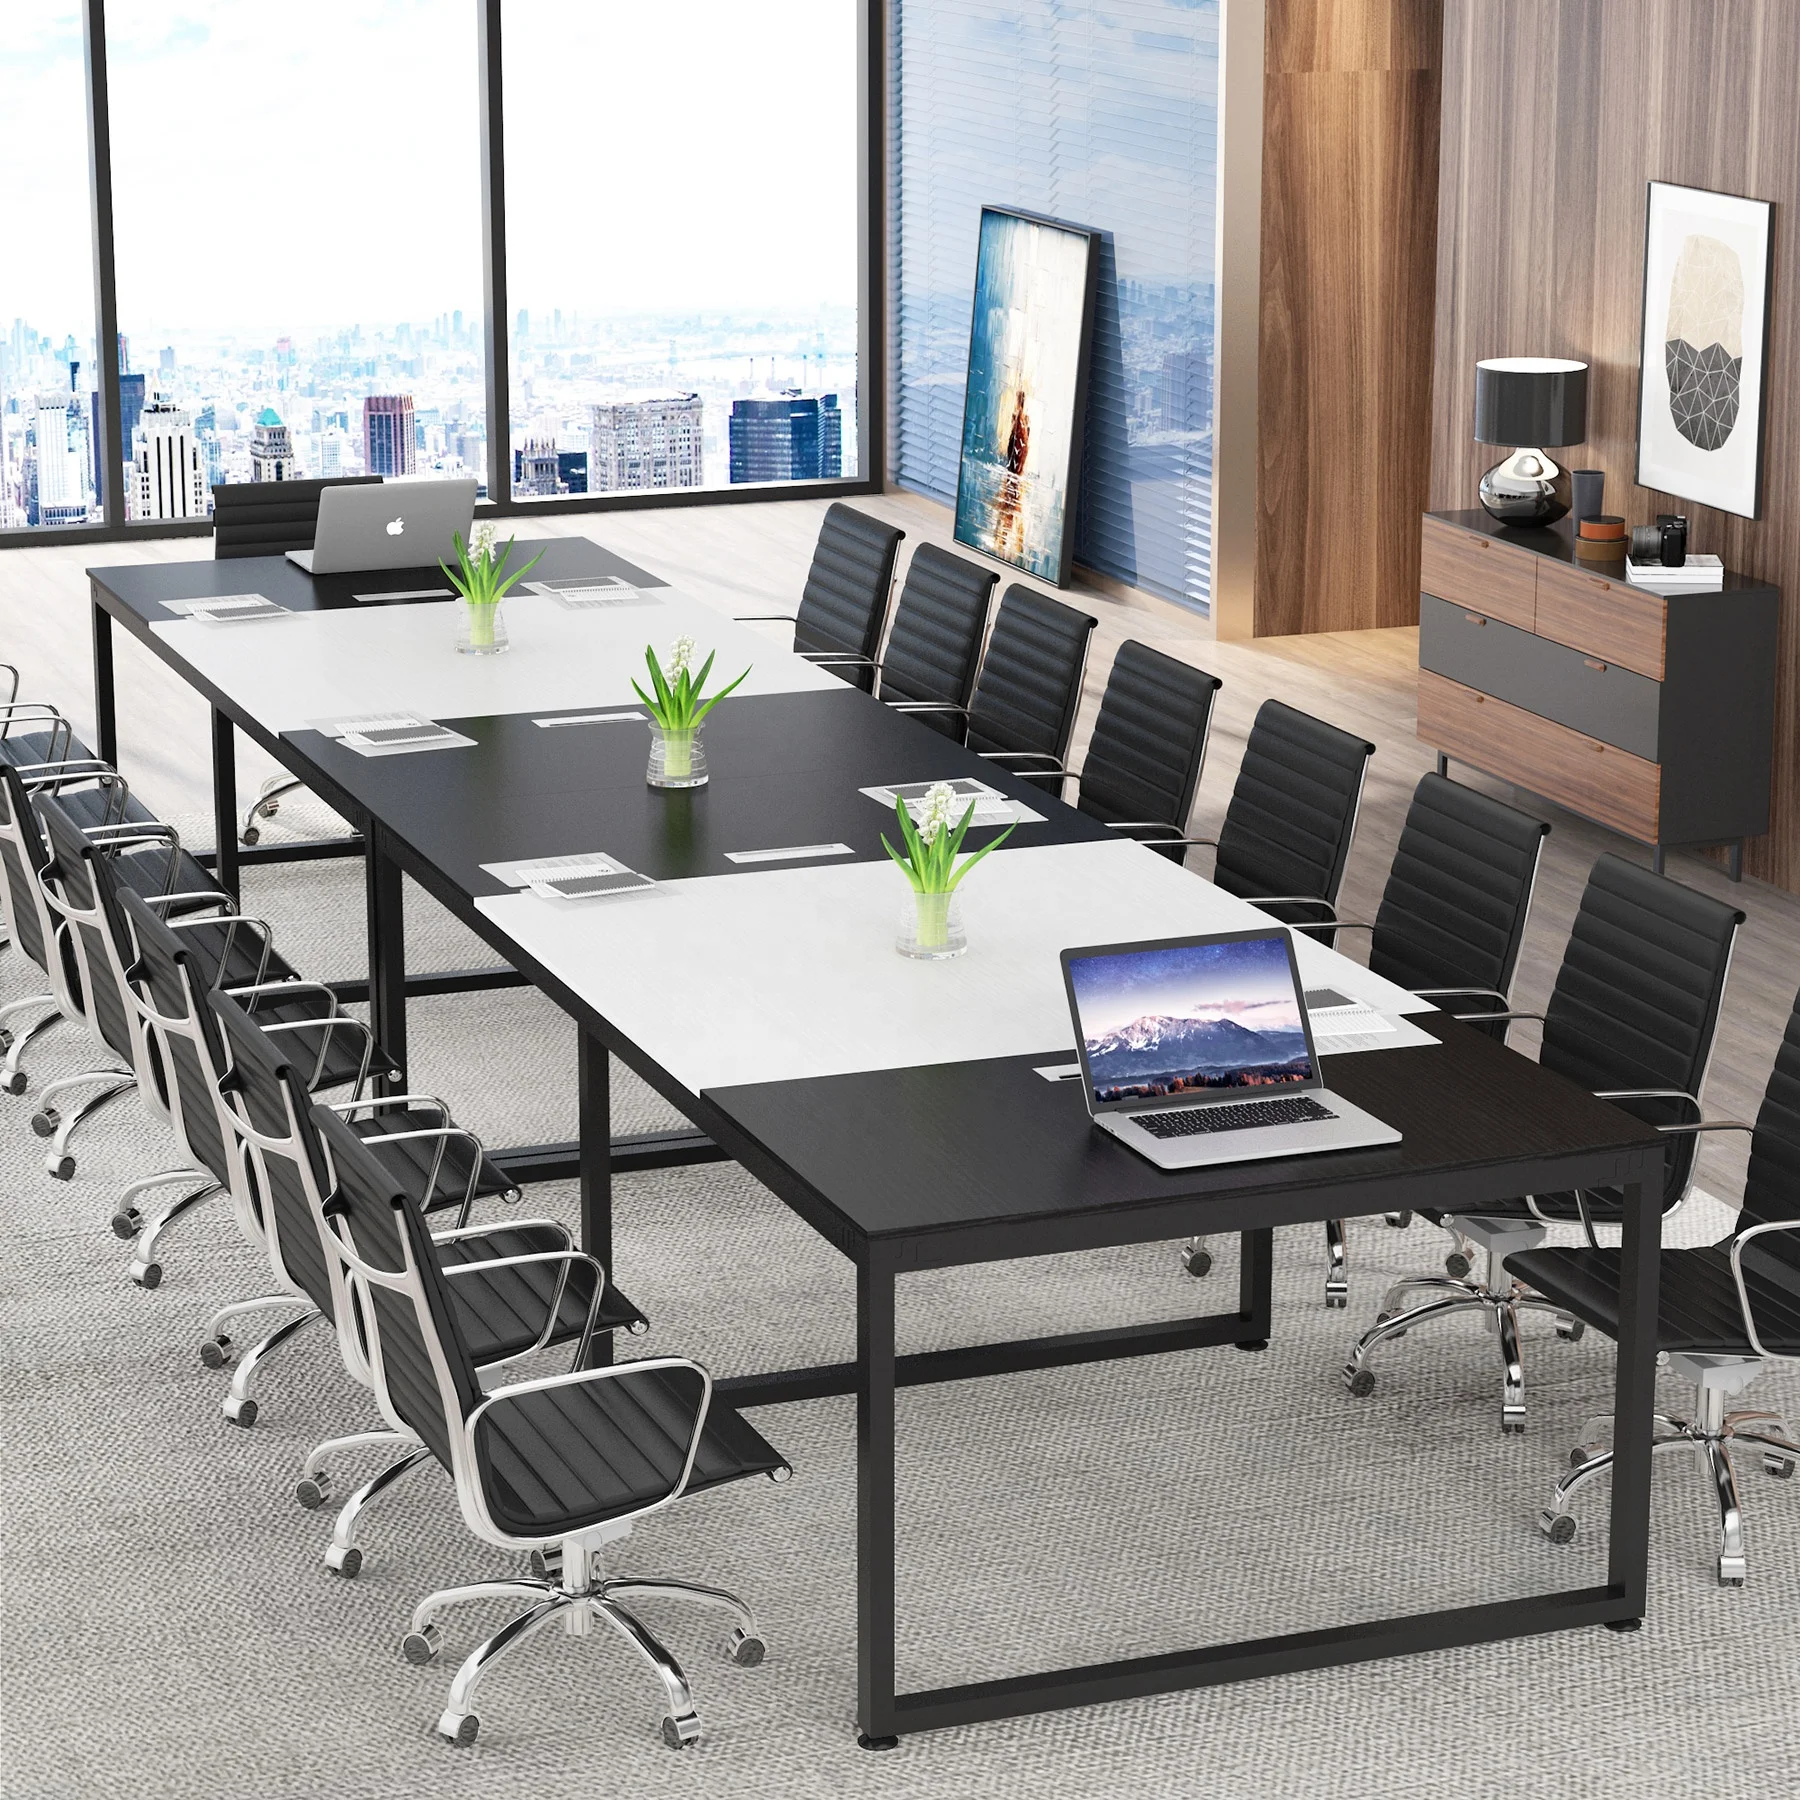 Tribesigns high quality customized modern boardroom table office furniture meeting room desk boardroom wood conference table